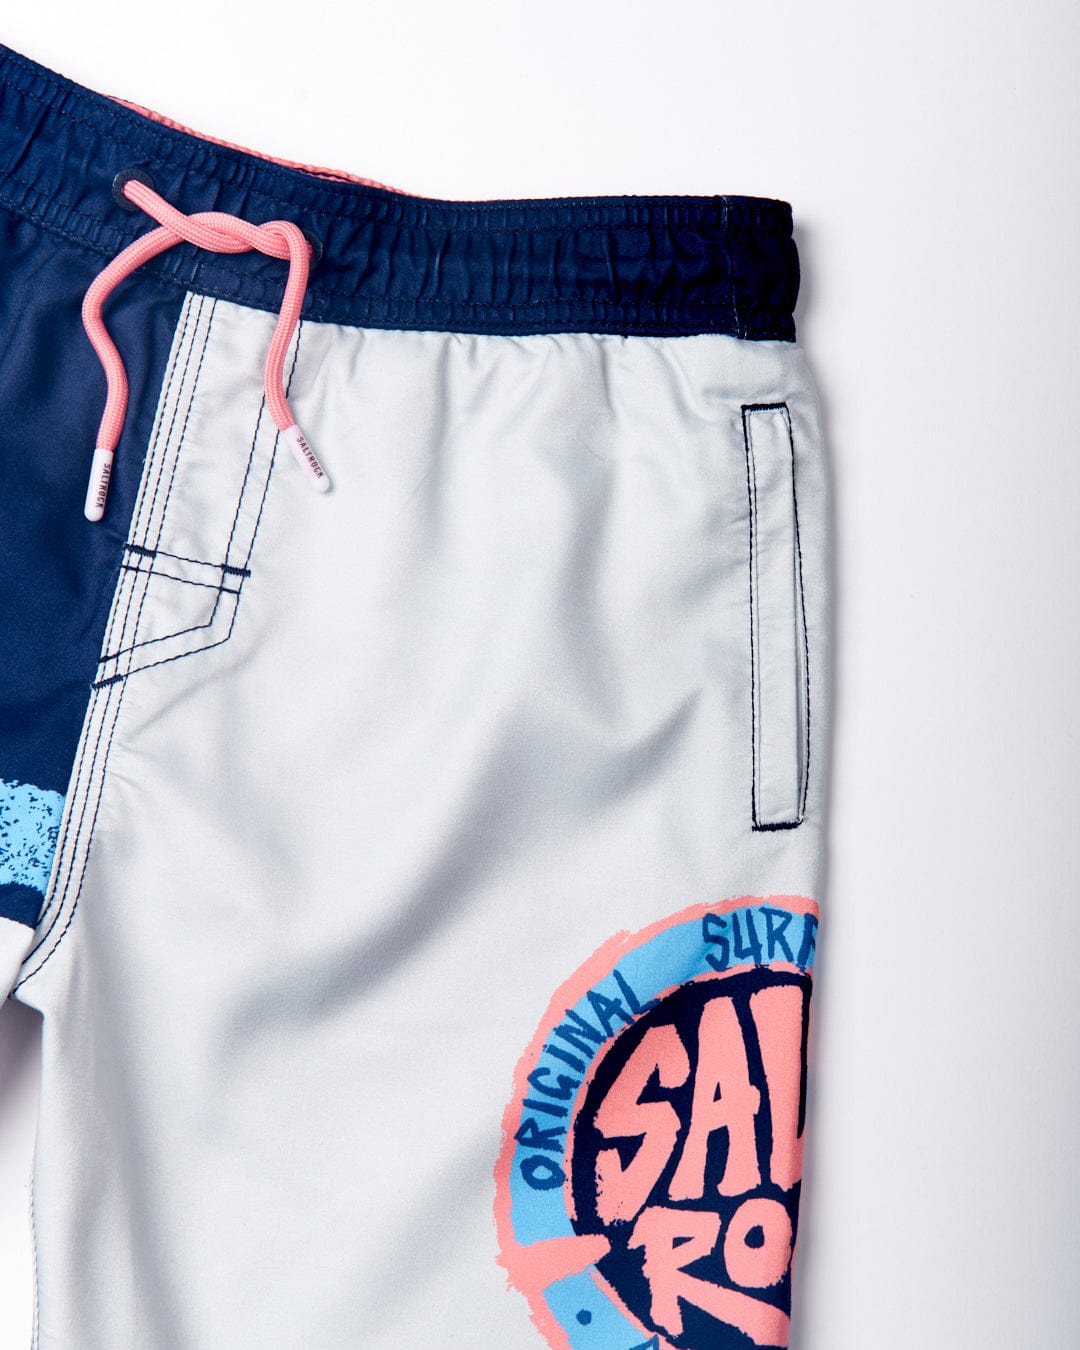 Image of light-colored swim trunks with a blue waistband and a pink drawstring featuring branded dipped rubber ends. The Saltrock Original SR - Kids Swimshorts - Blue have an elasticated waist and a pink and blue graphic displaying the words "Original Surf" and "SALE" near the hem, along with subtle Saltrock branding.